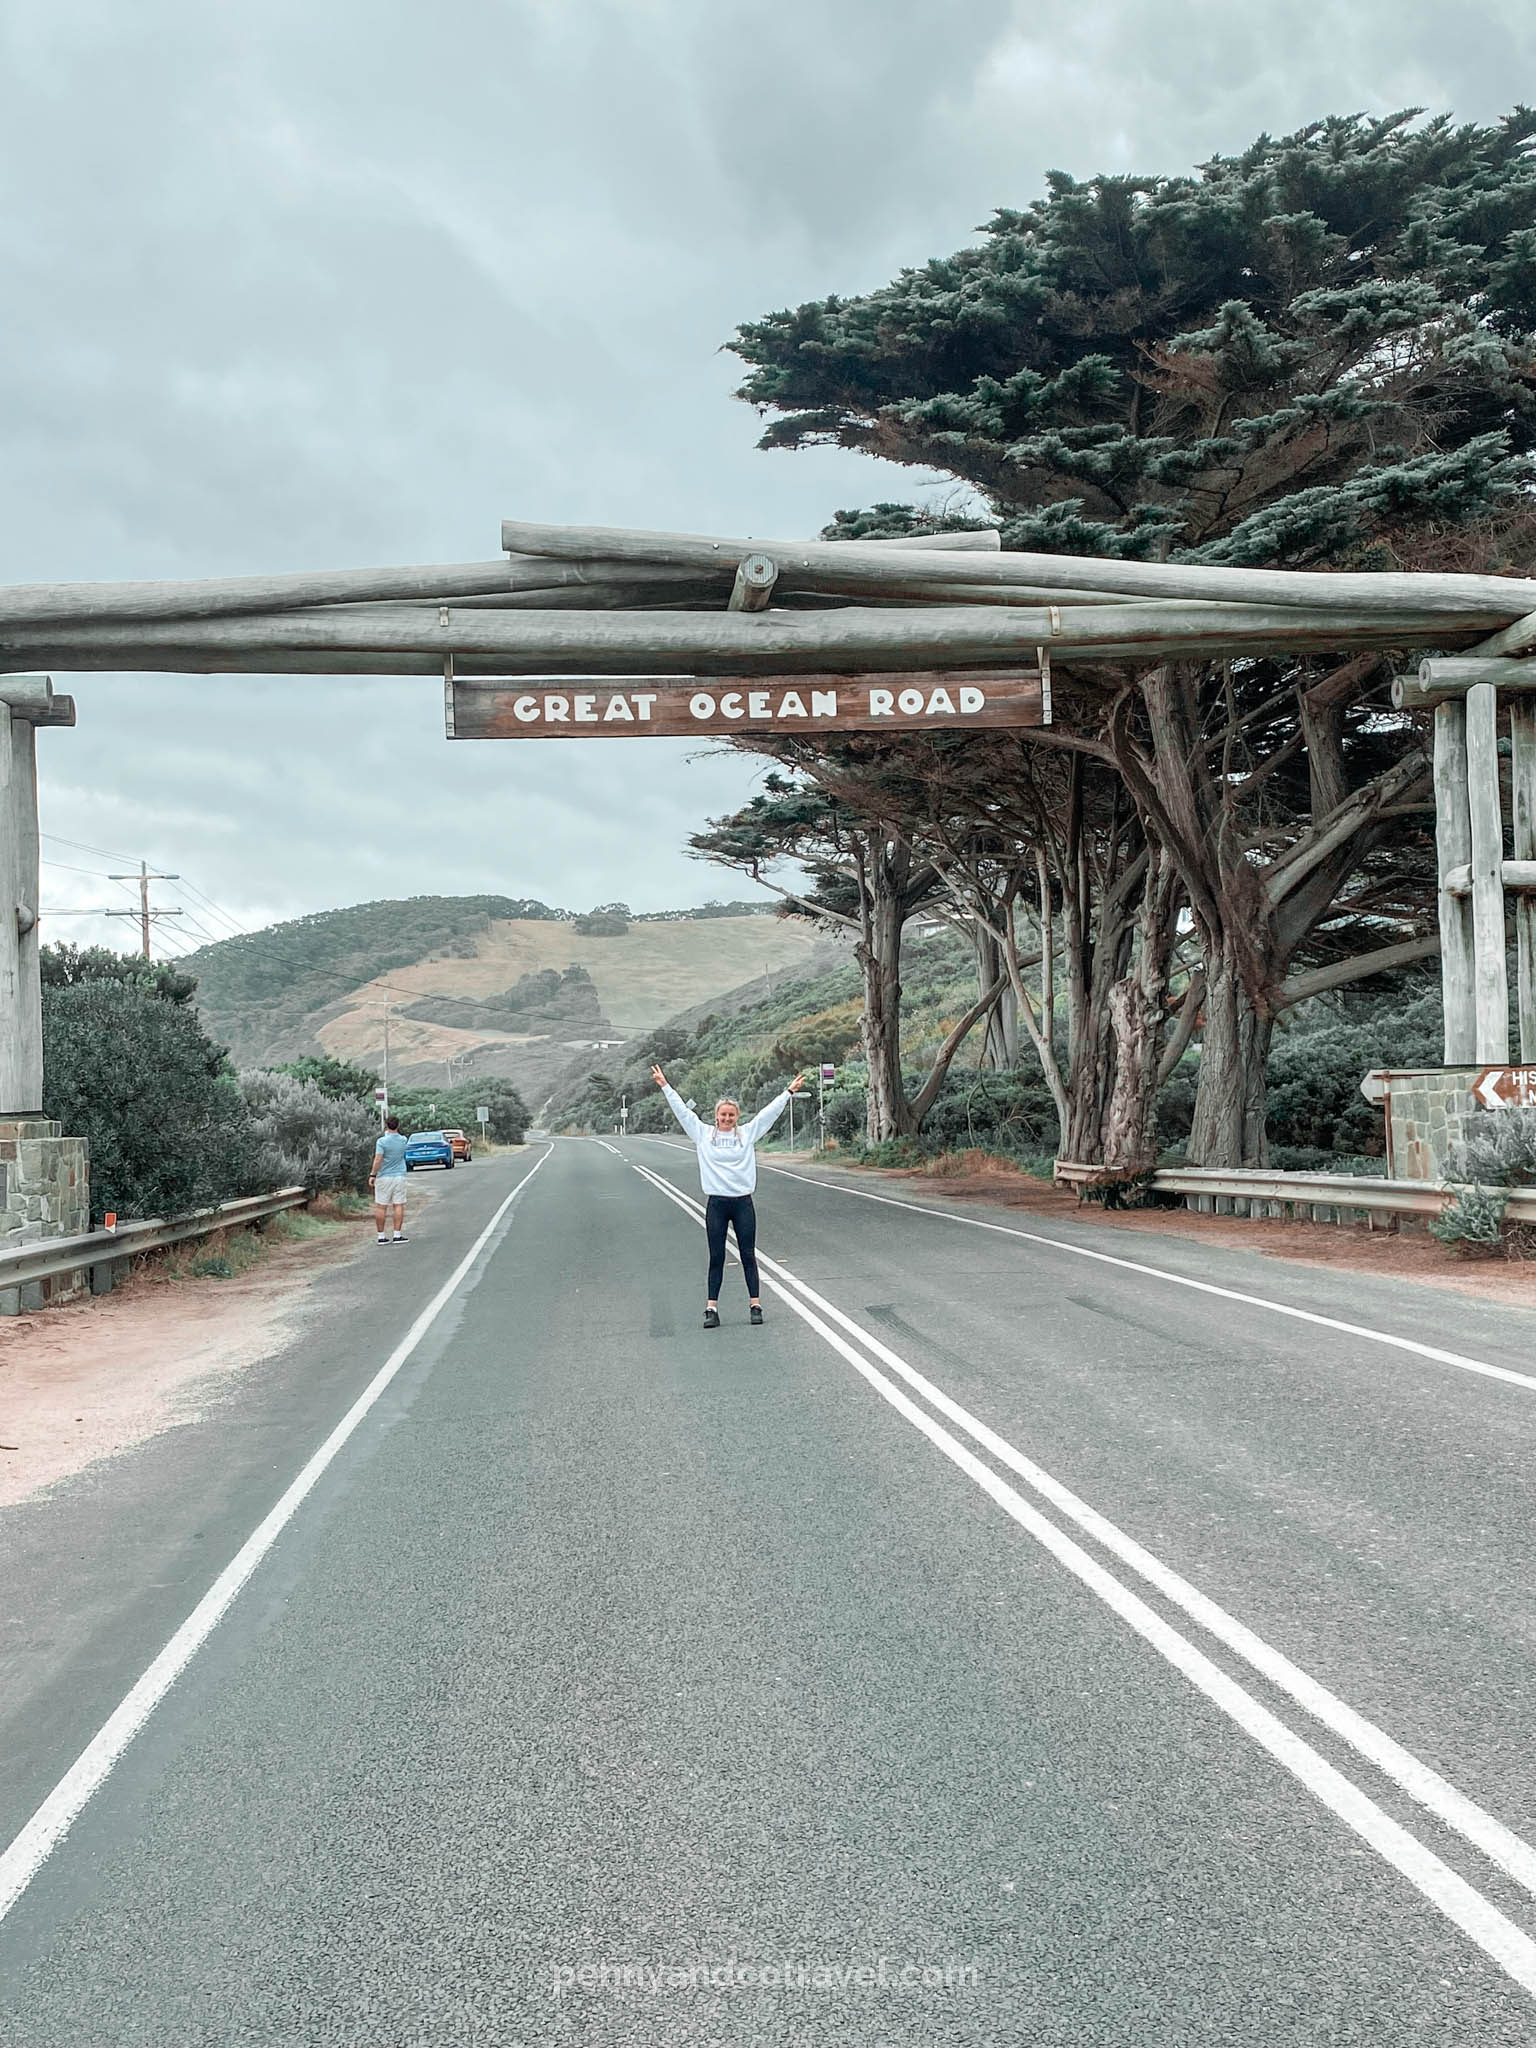 Things to do along the great ocean road > get a photo at the start of the scenic road